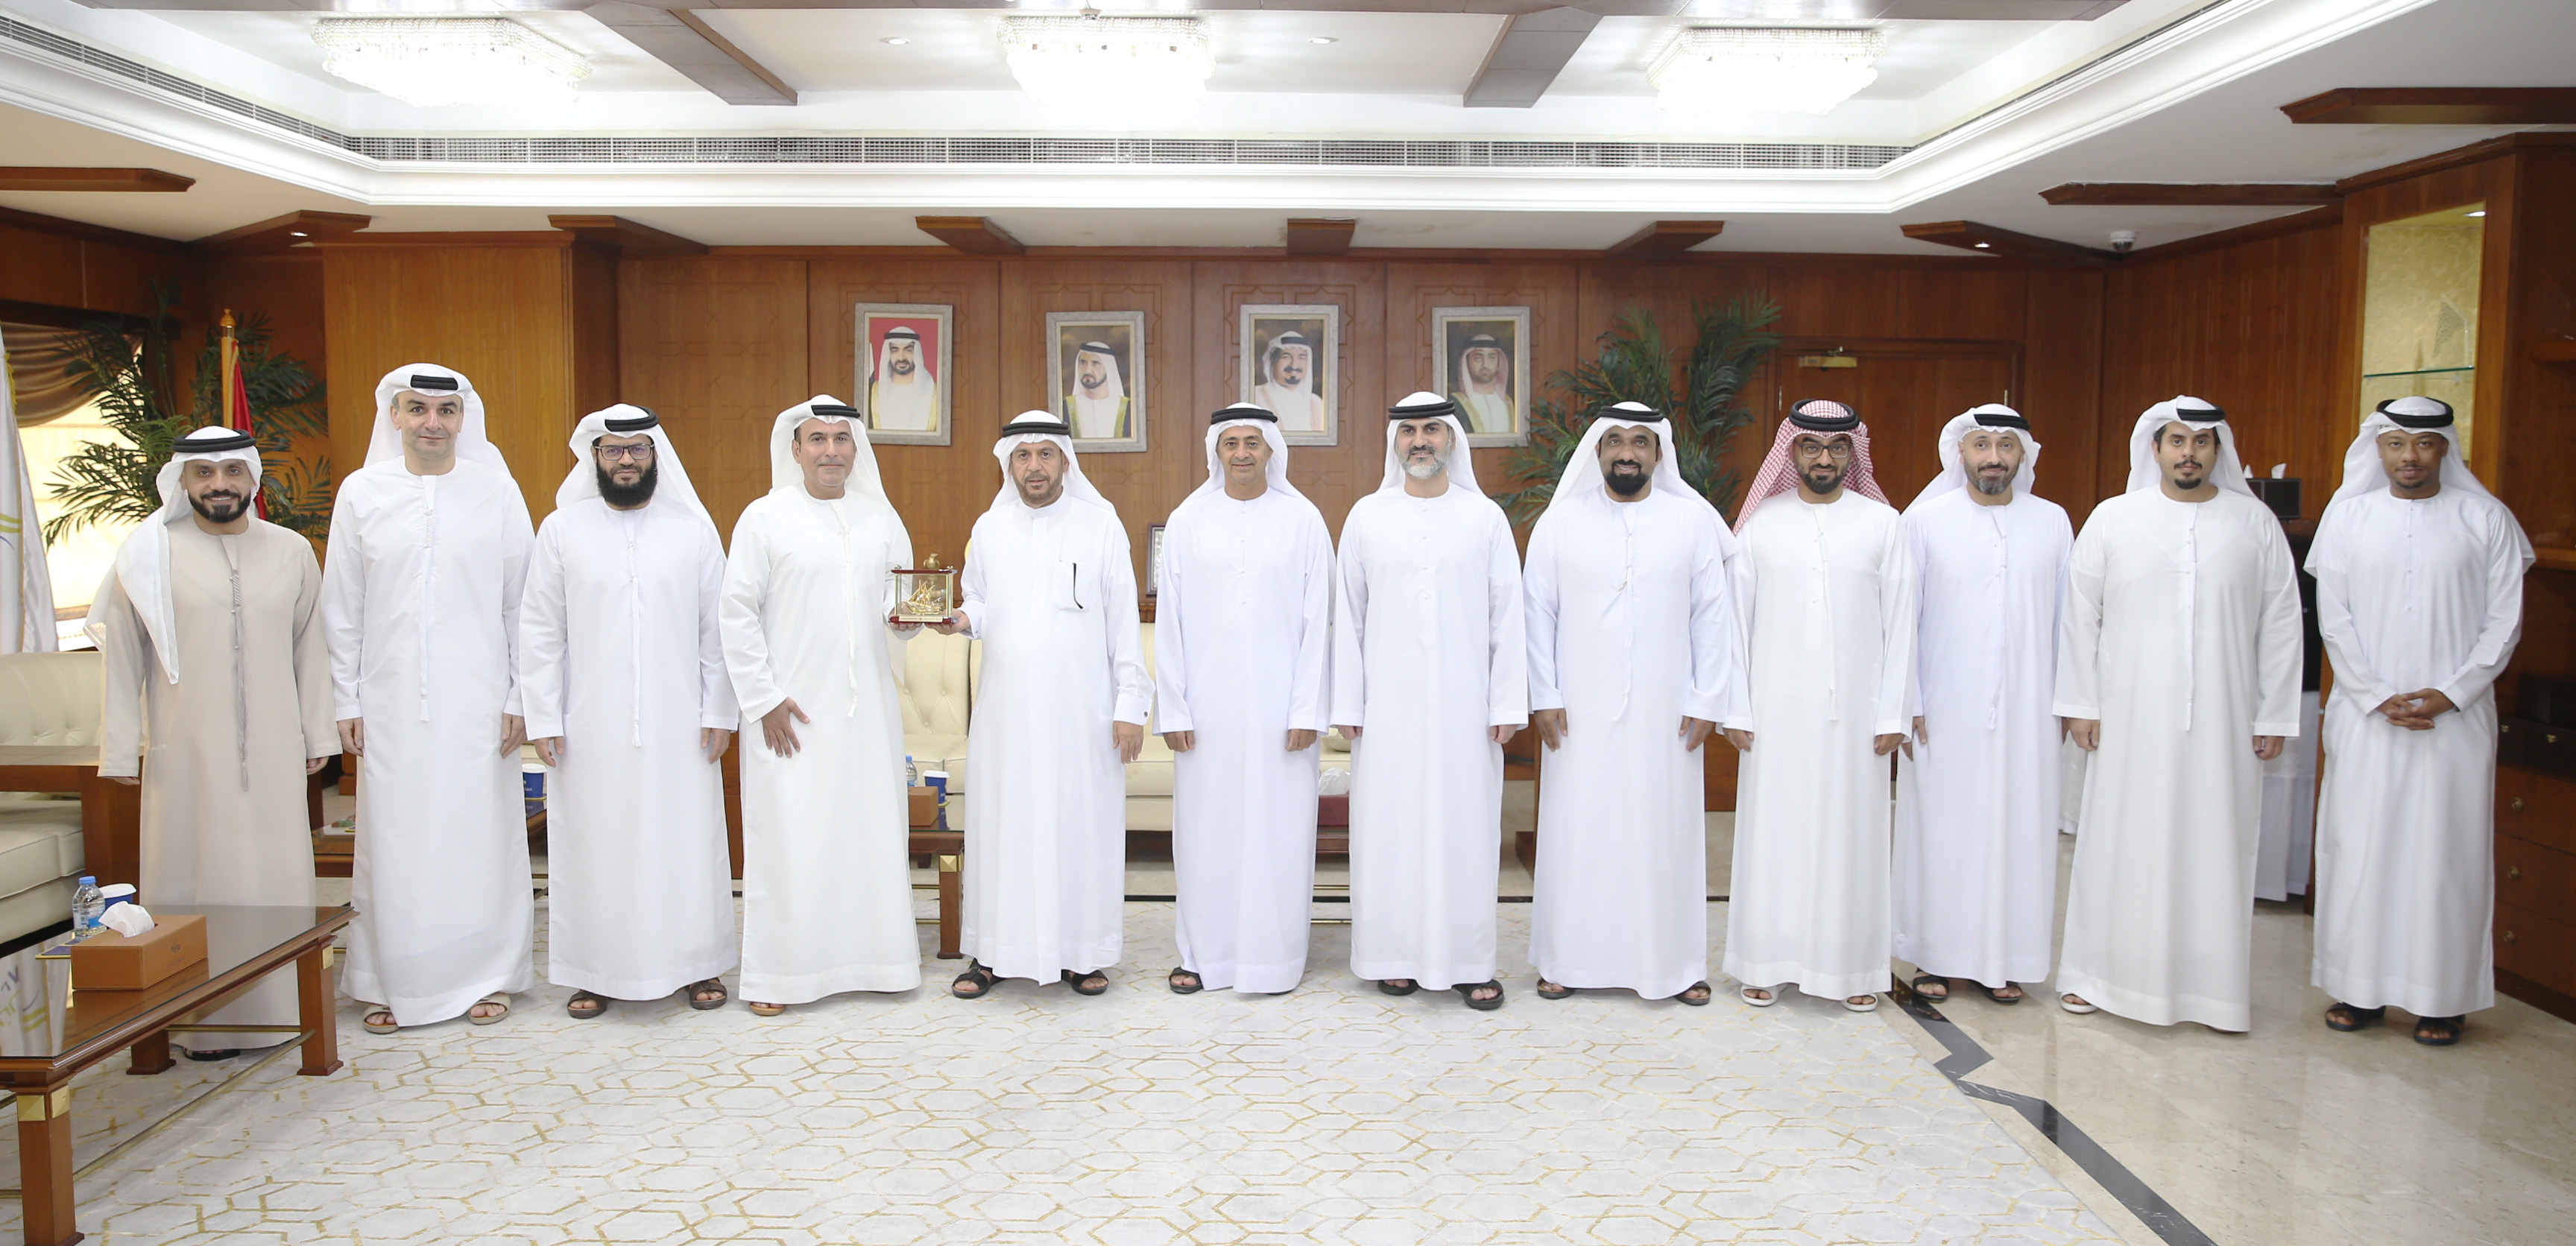 Ajman Chamber and ESH are discussing cooperation and partnership opportunities